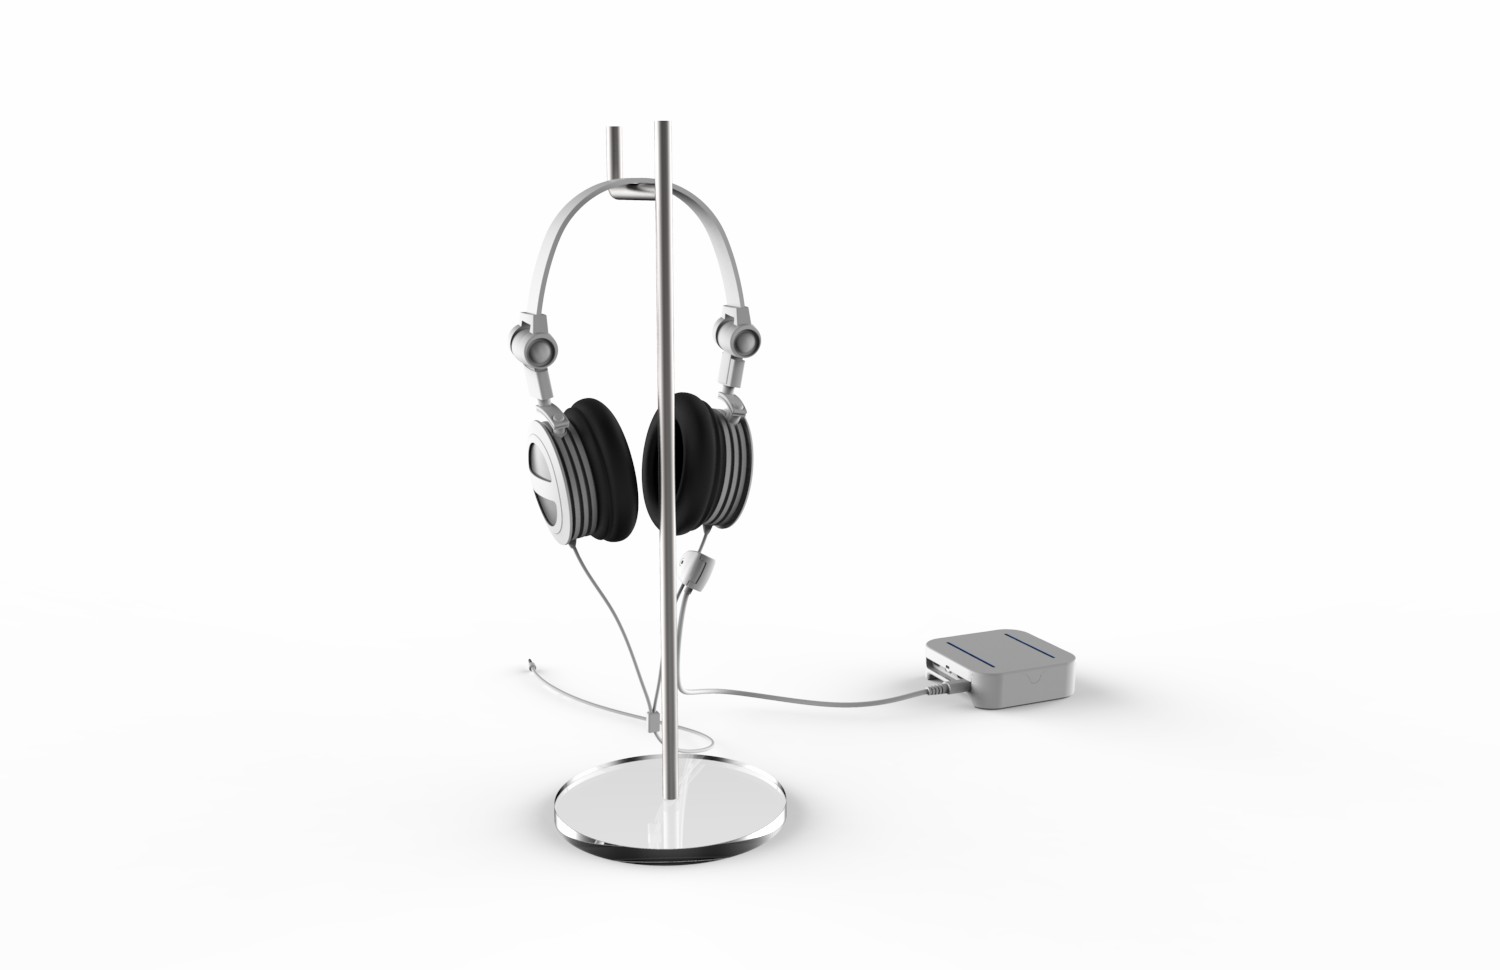 Headset display security stand